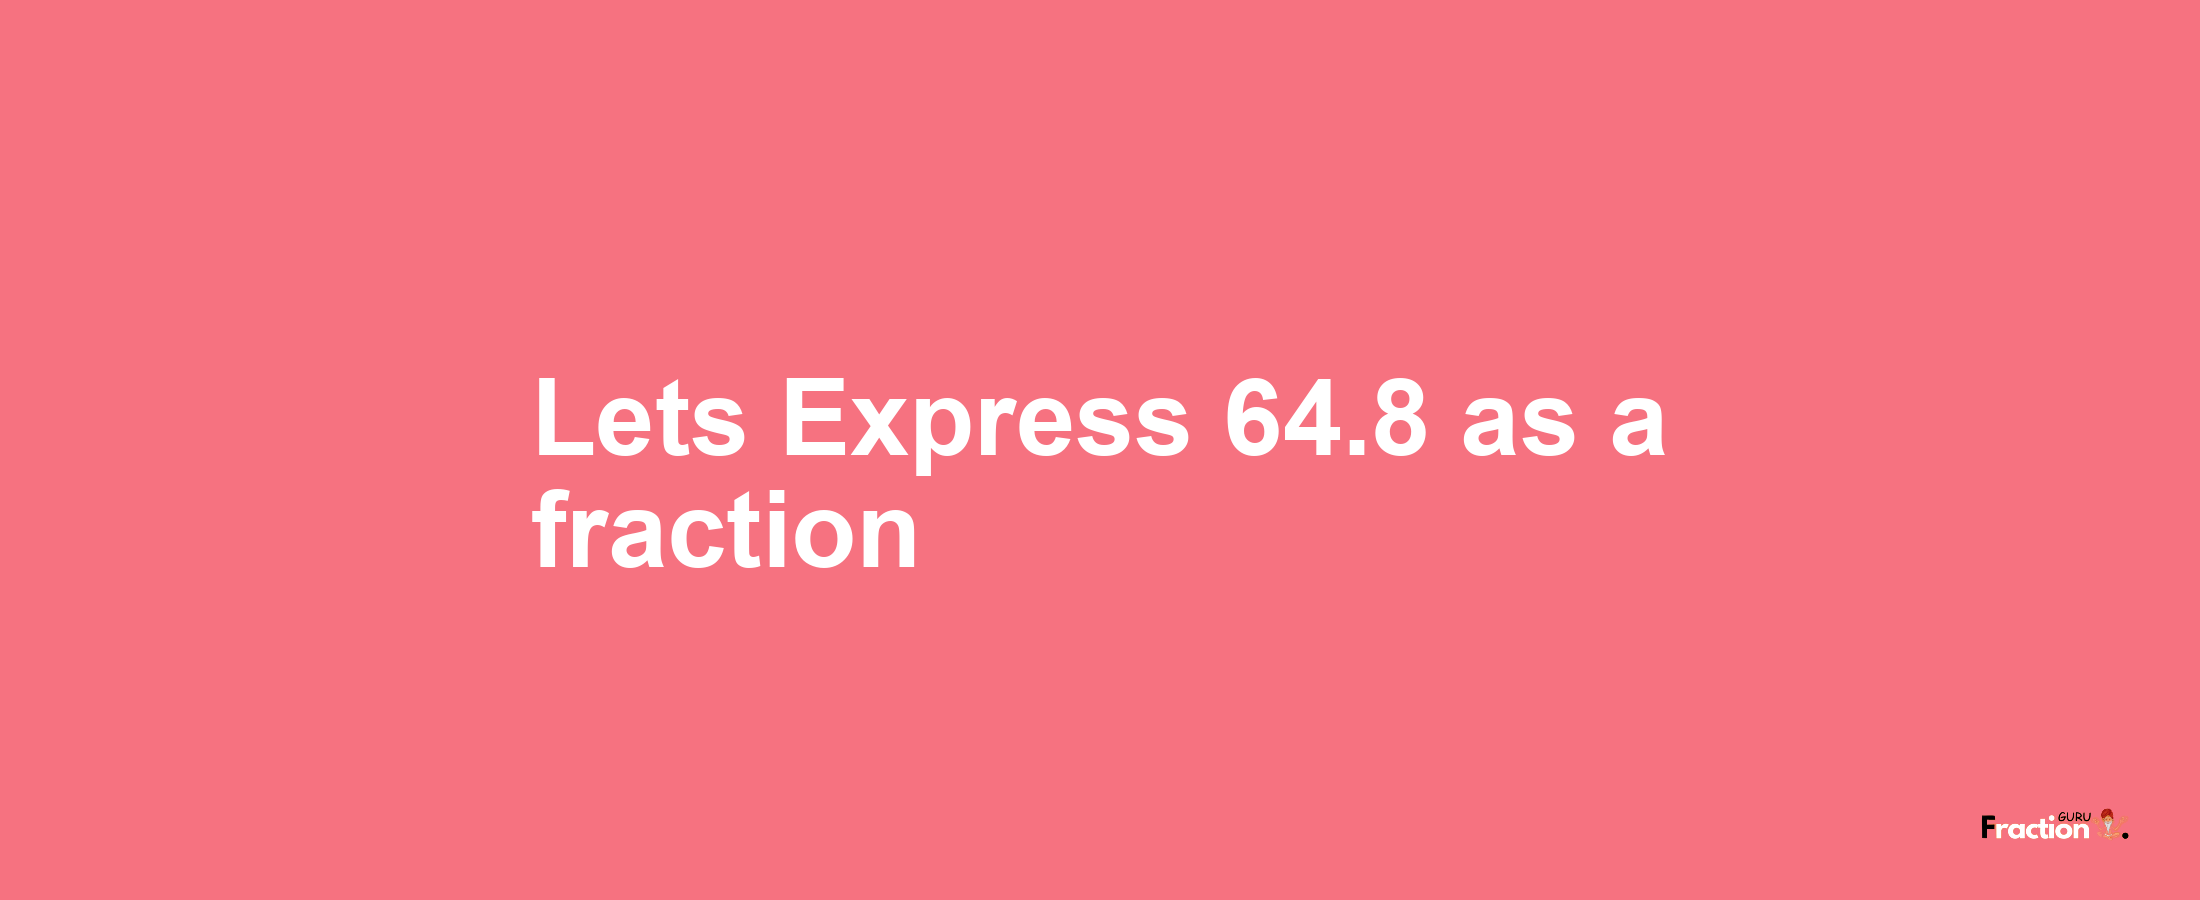 Lets Express 64.8 as afraction